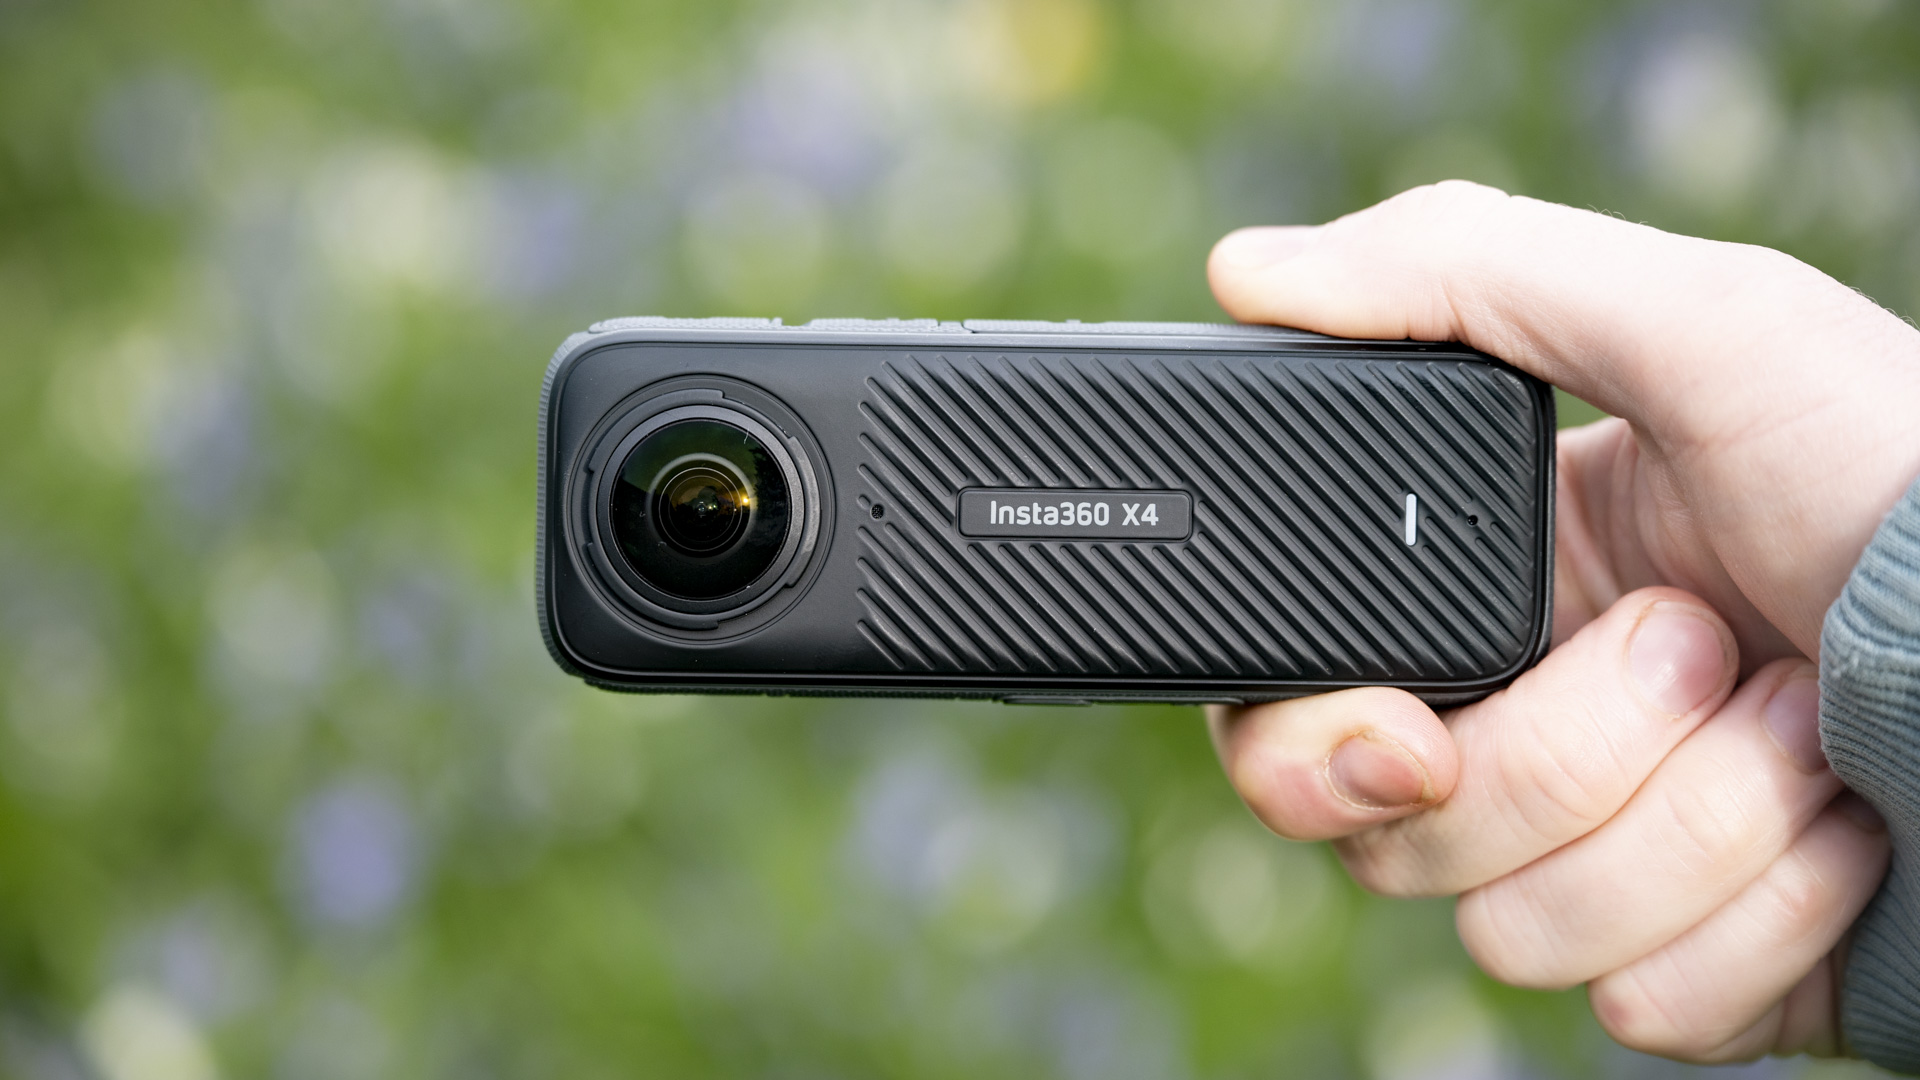 Insta360 X4 360 degree camera in the hand outdoors with vibrant grassy background